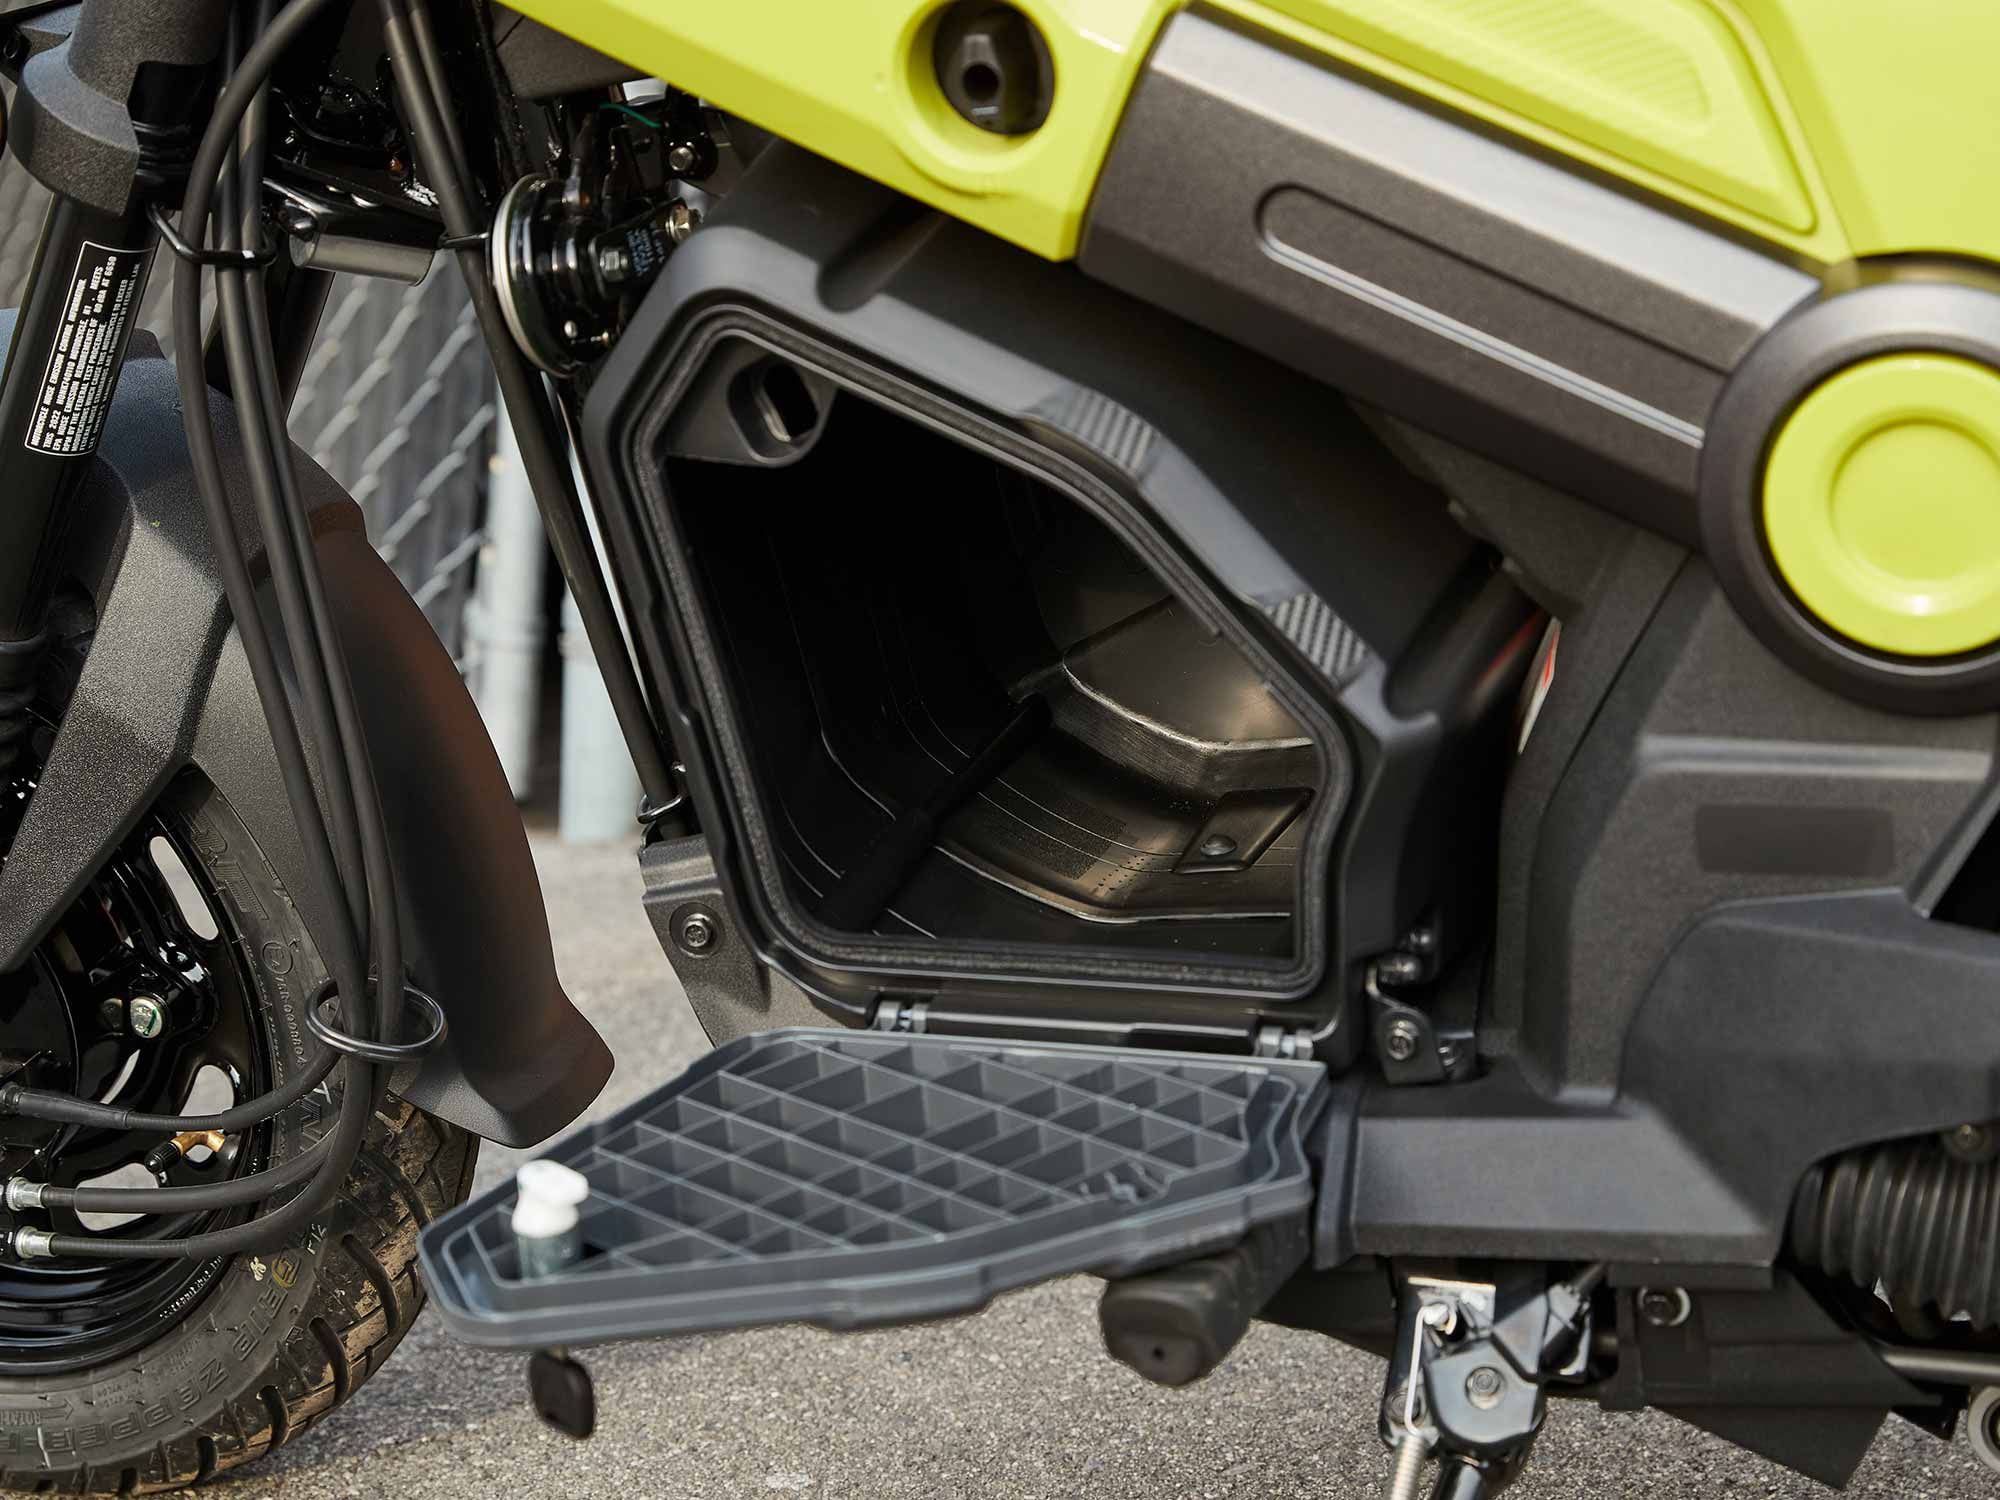 The 15-liter storage compartment is big enough to fit a rolled-up jacket and gloves or a small bag of groceries. Plus it’s water-resistant, keyed to the ignition key, and removable.